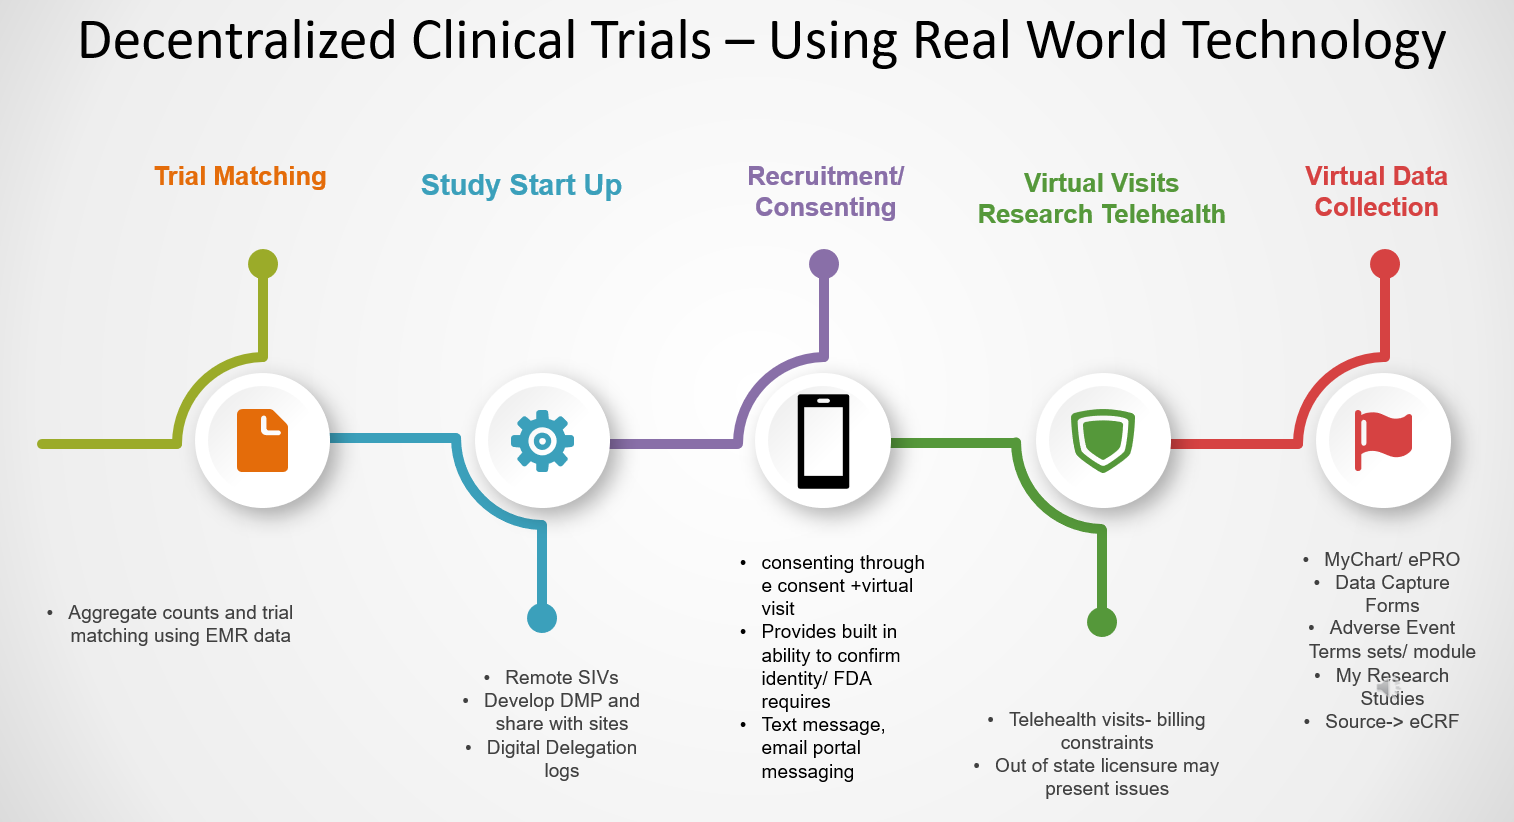 Image caption: Modes of decentralized options and methods can be used at almost all stages of a clinical research study . Alt text- image of flow chart of decentralized trials, listing tools and methods to be used at each step of a clinical research study. 